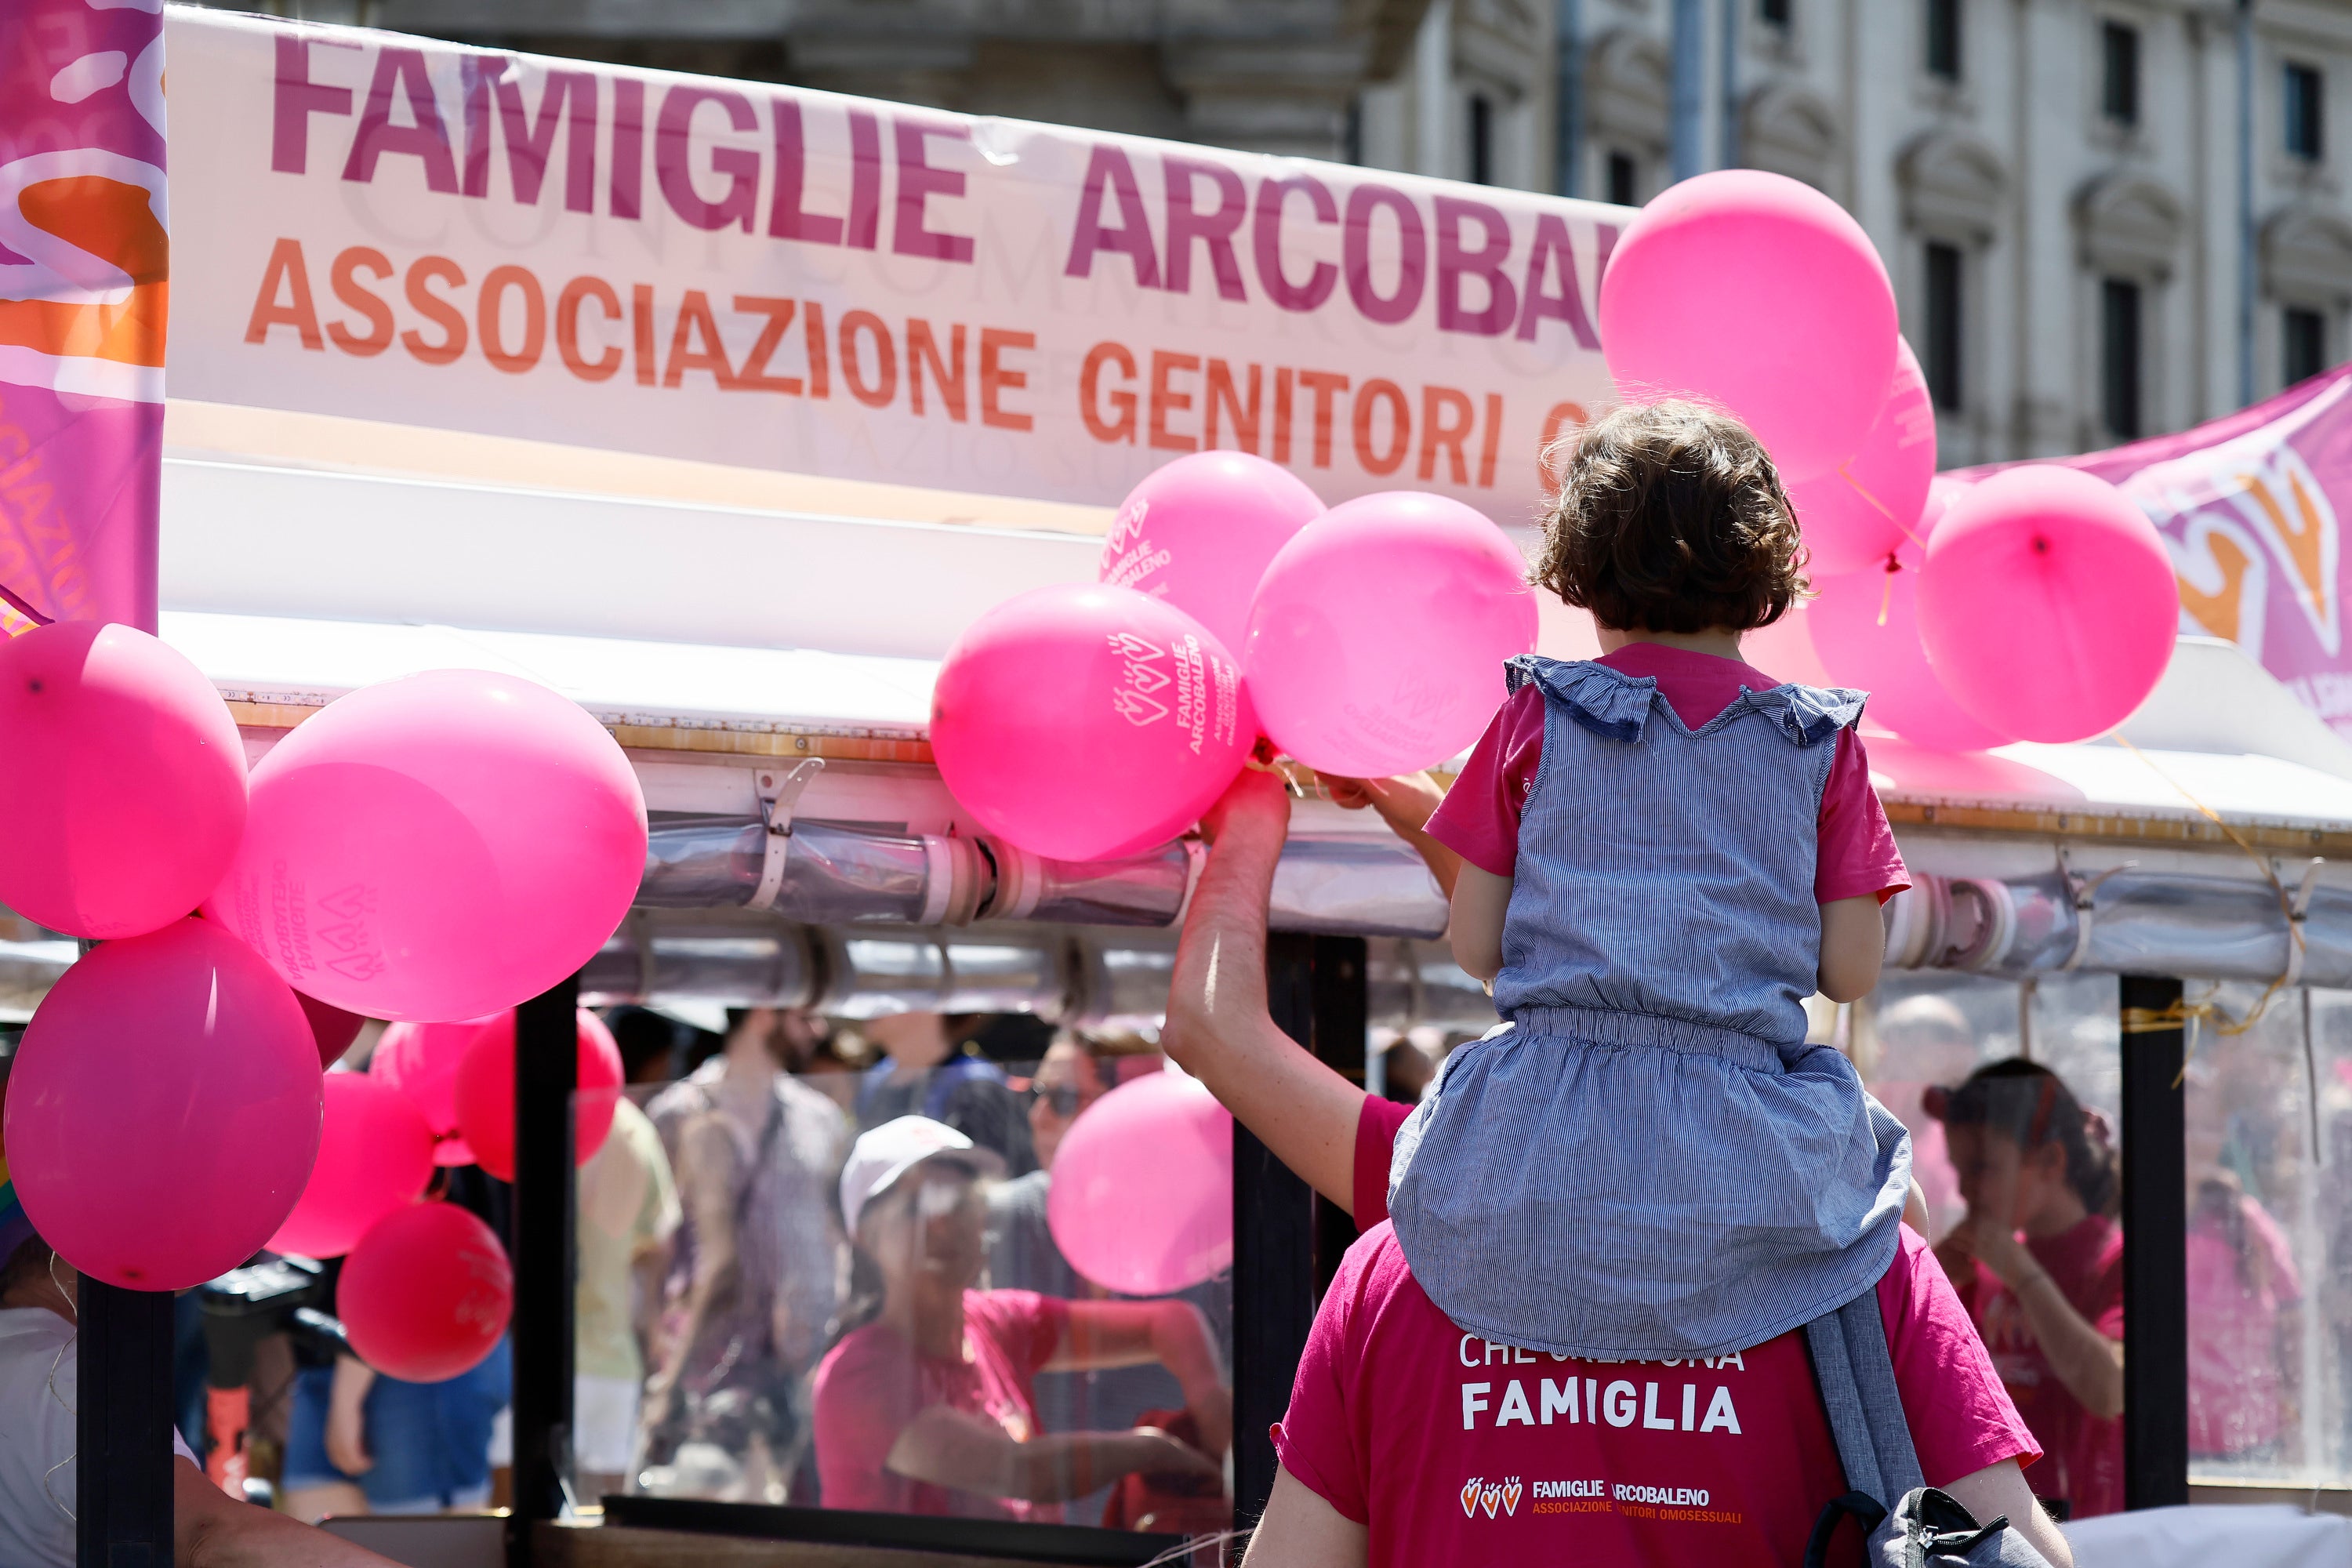 This Italian law is part of a worrying global trend across the world toward anti-LGBT+ legislation